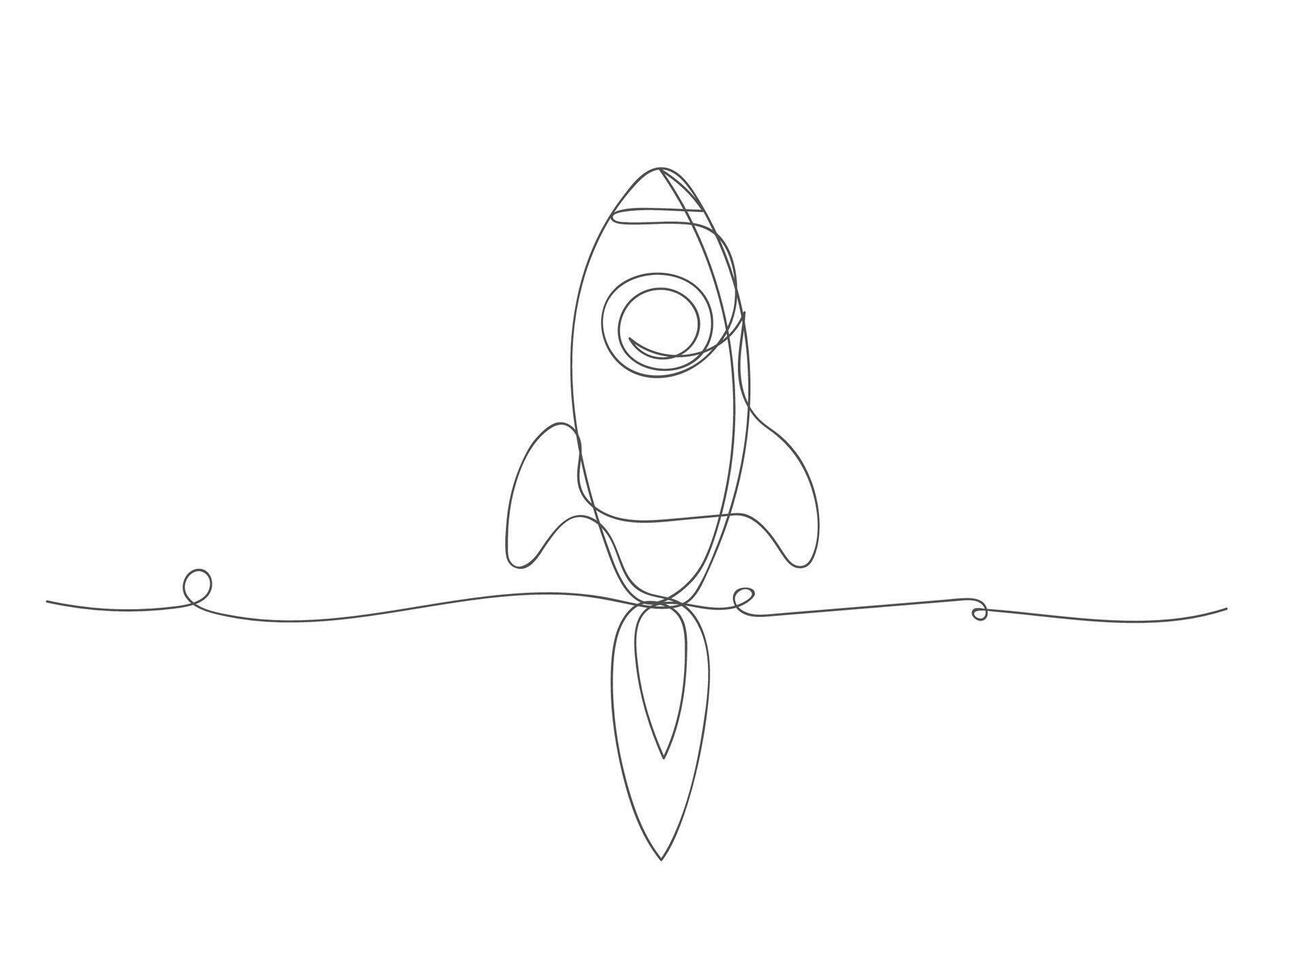 Rocket continuous one line drawing shape art isolated vector illustration.